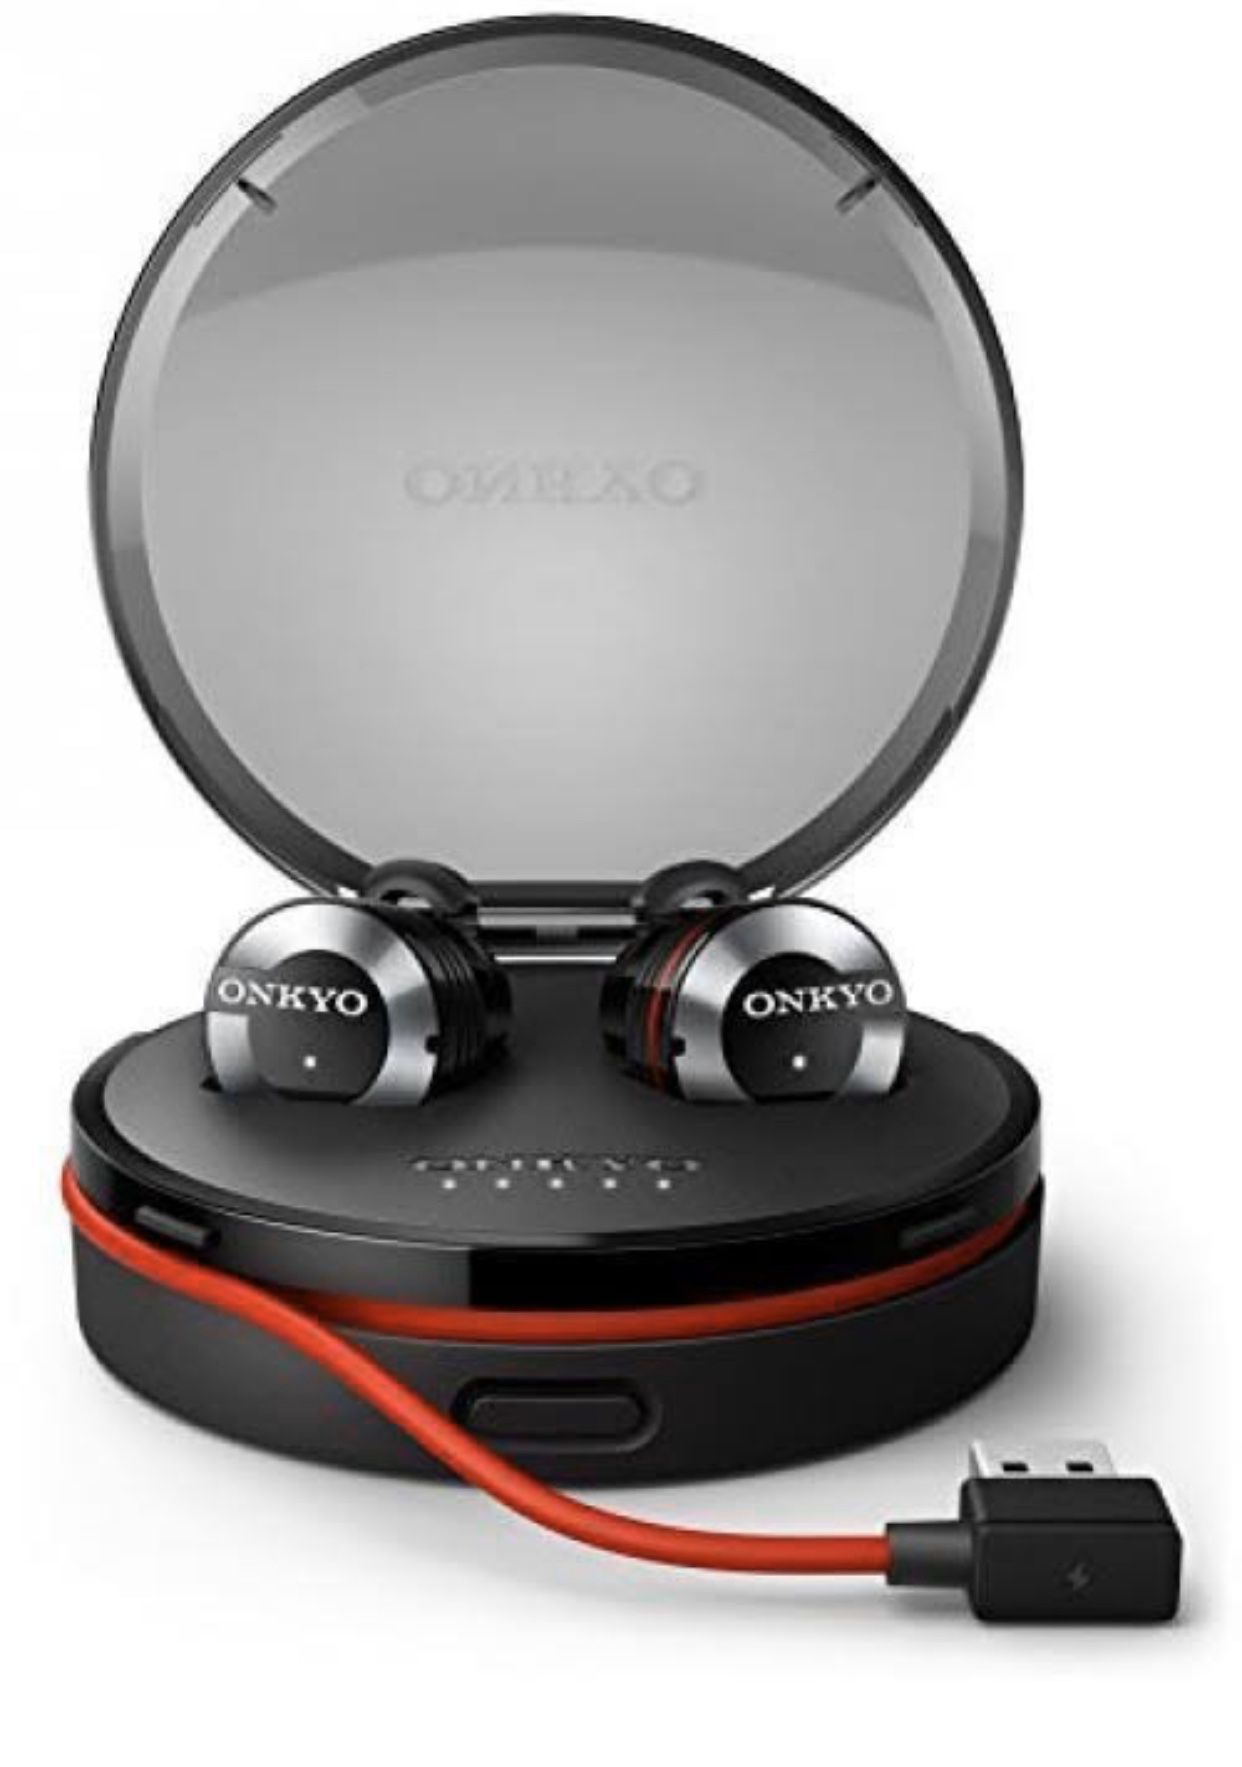 Onkyo earbuds